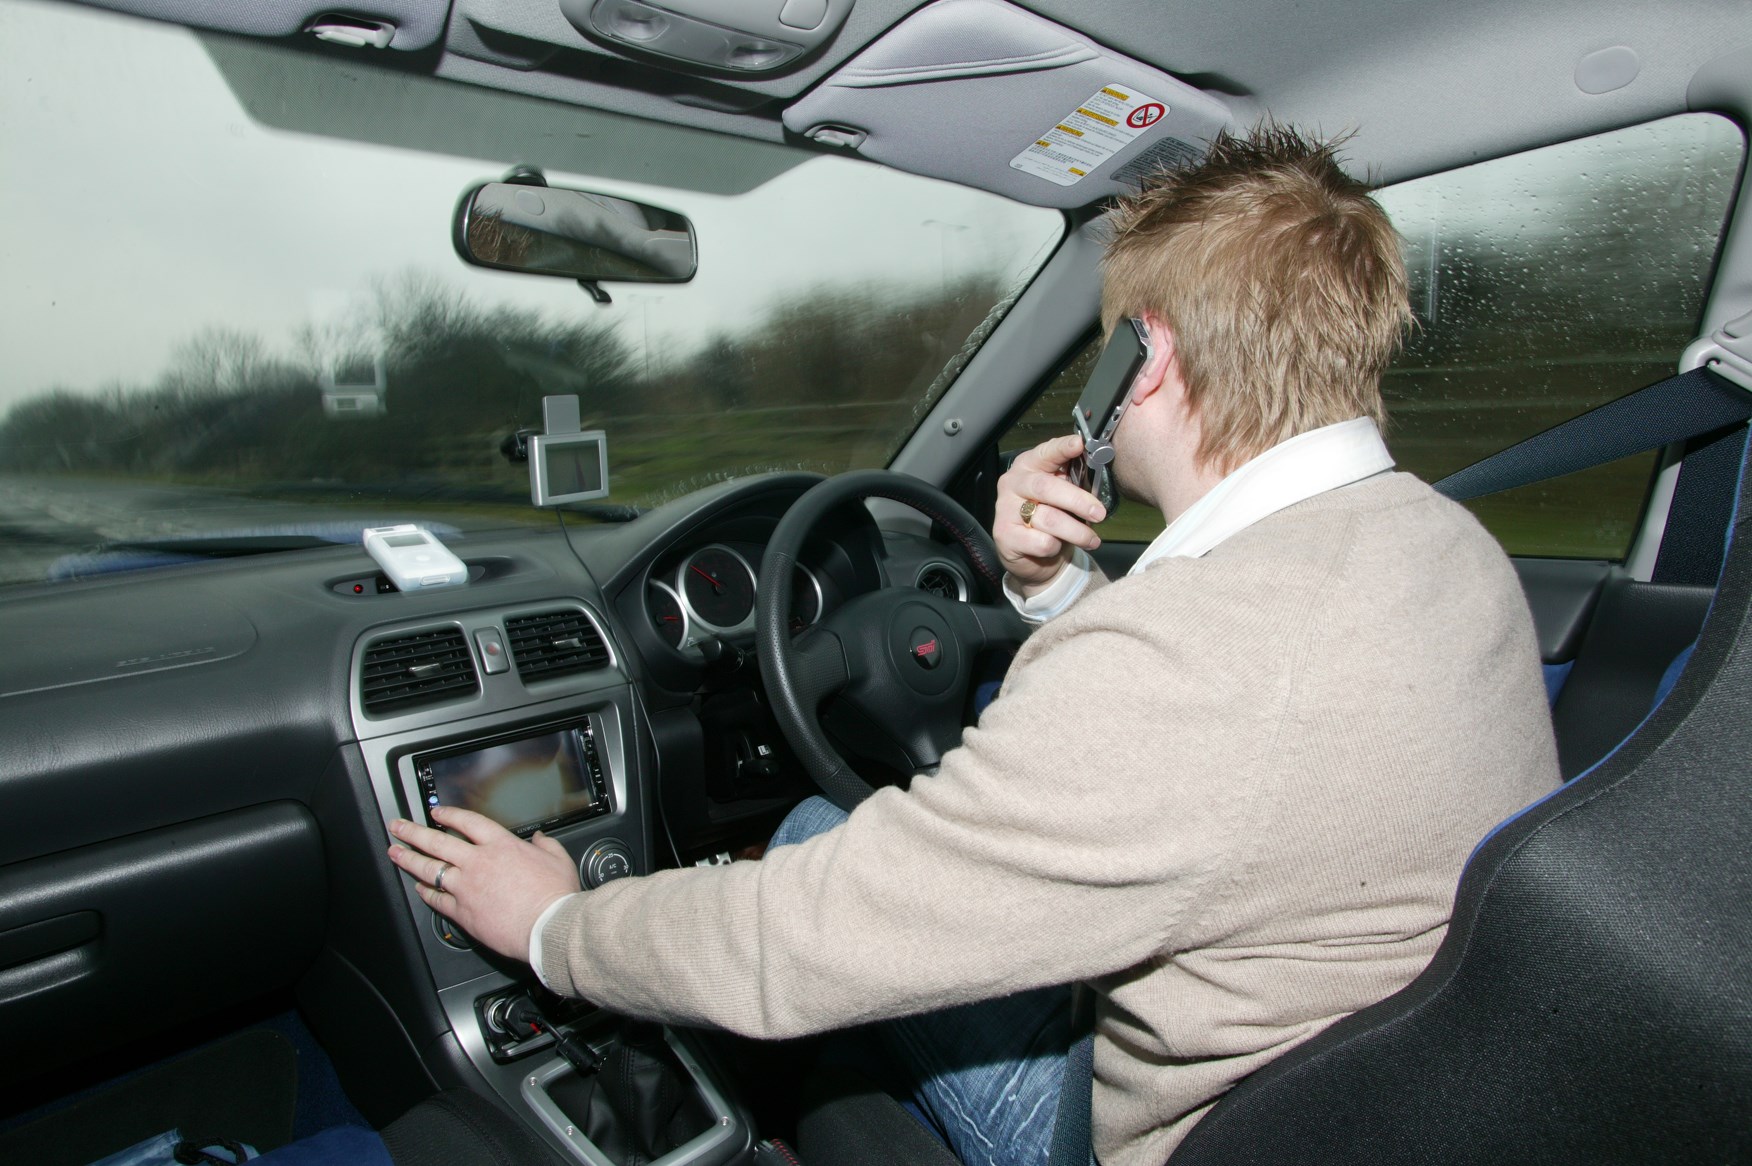 Consequences Of Using Mobile Phones While driving